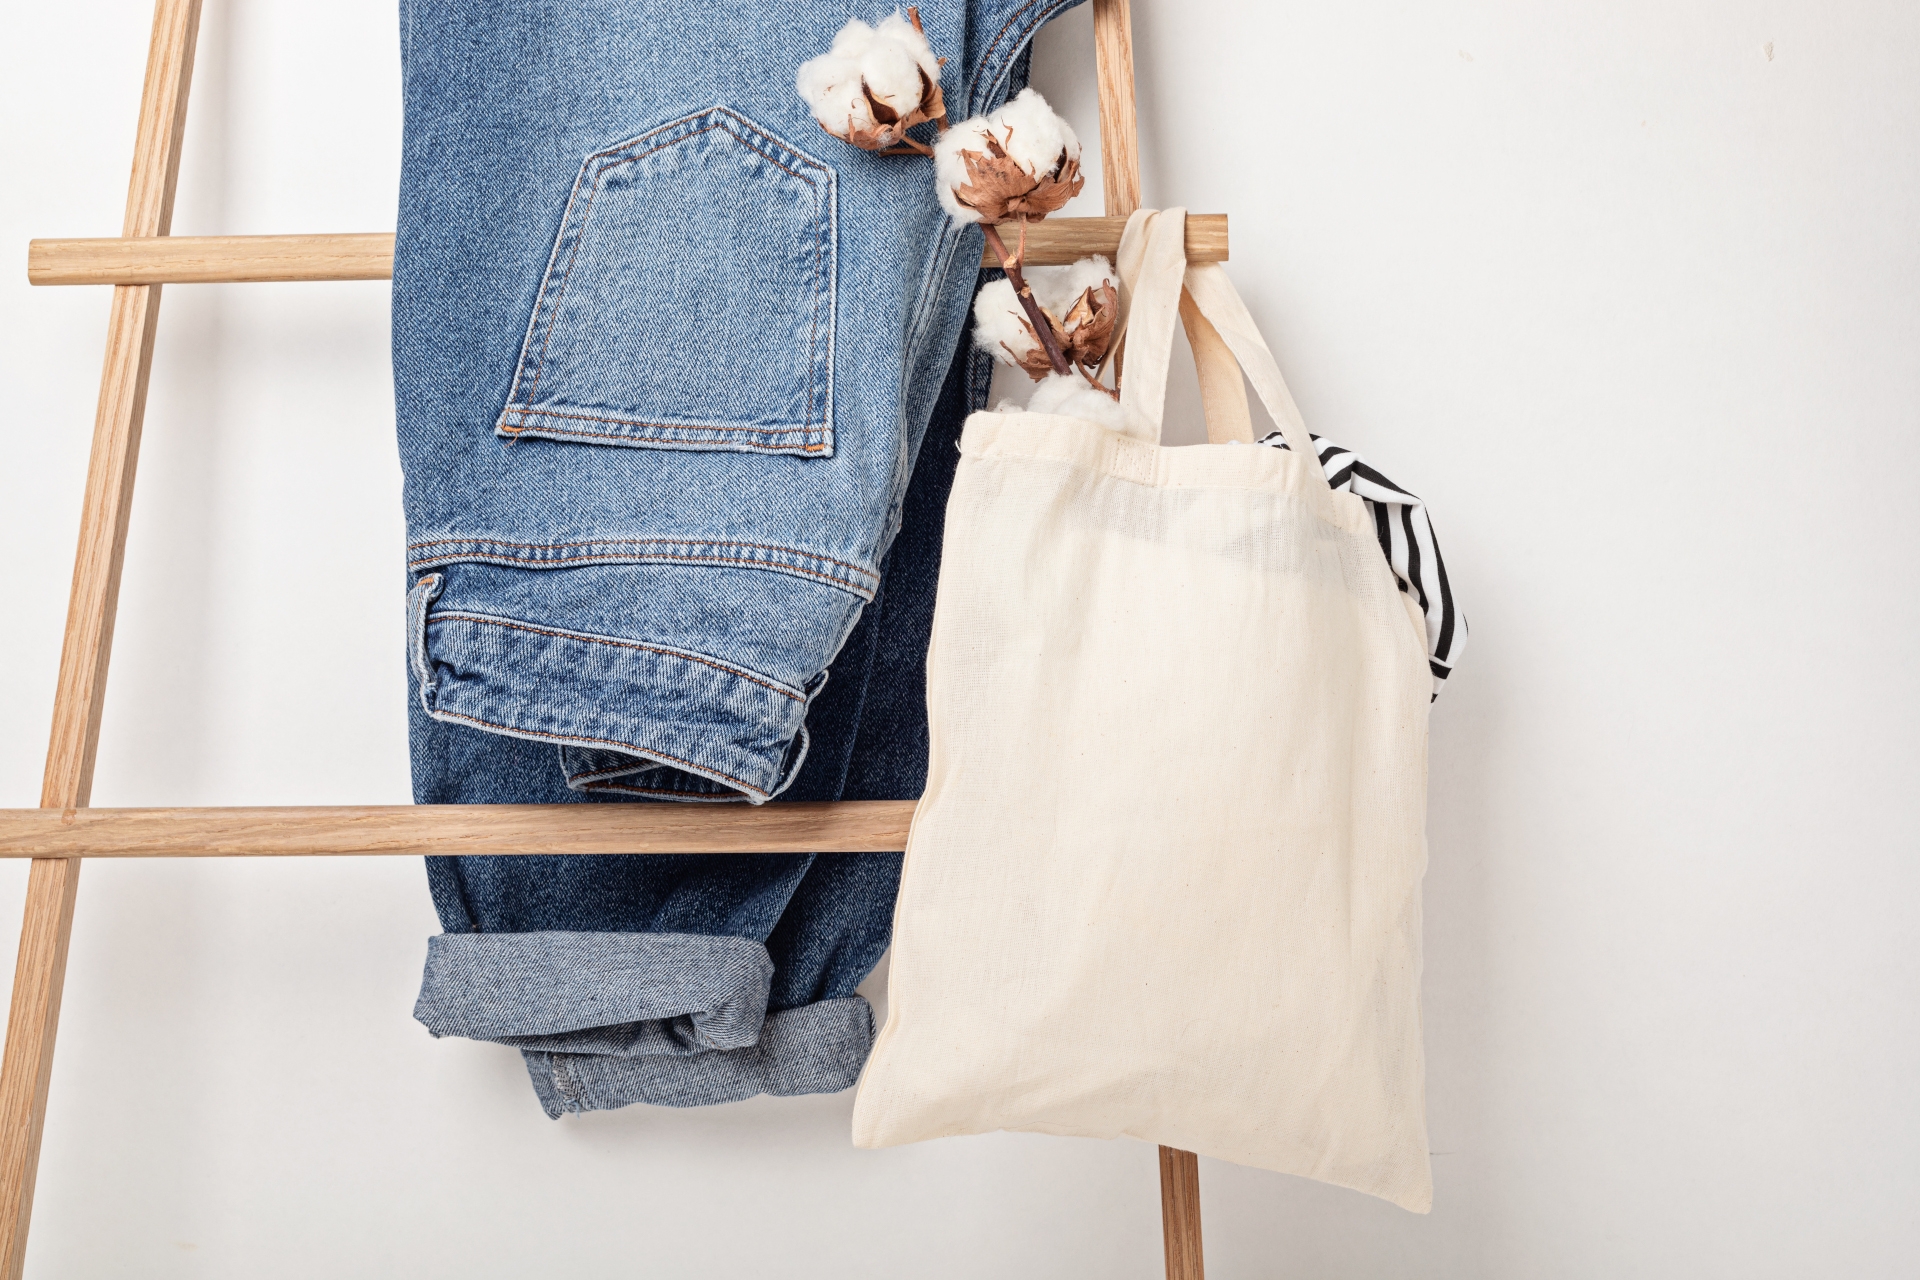 Which is more sustainable: a plastic bag or a cotton bag?